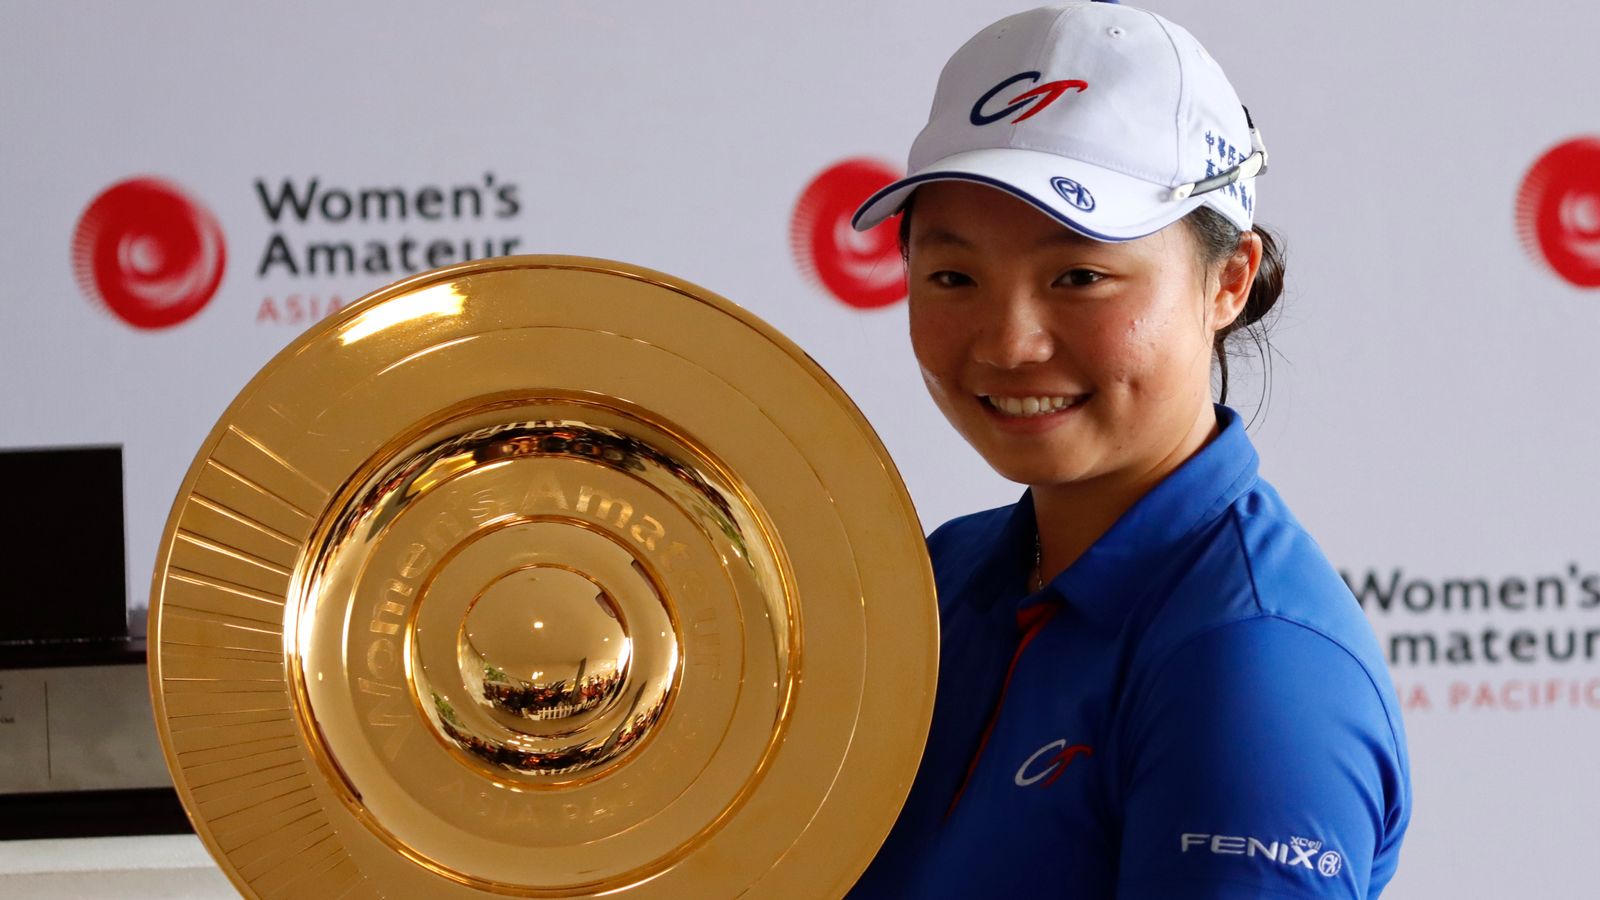 Ting Hsuan Huang Qualifies For Majors After Winning Womens Amateur 